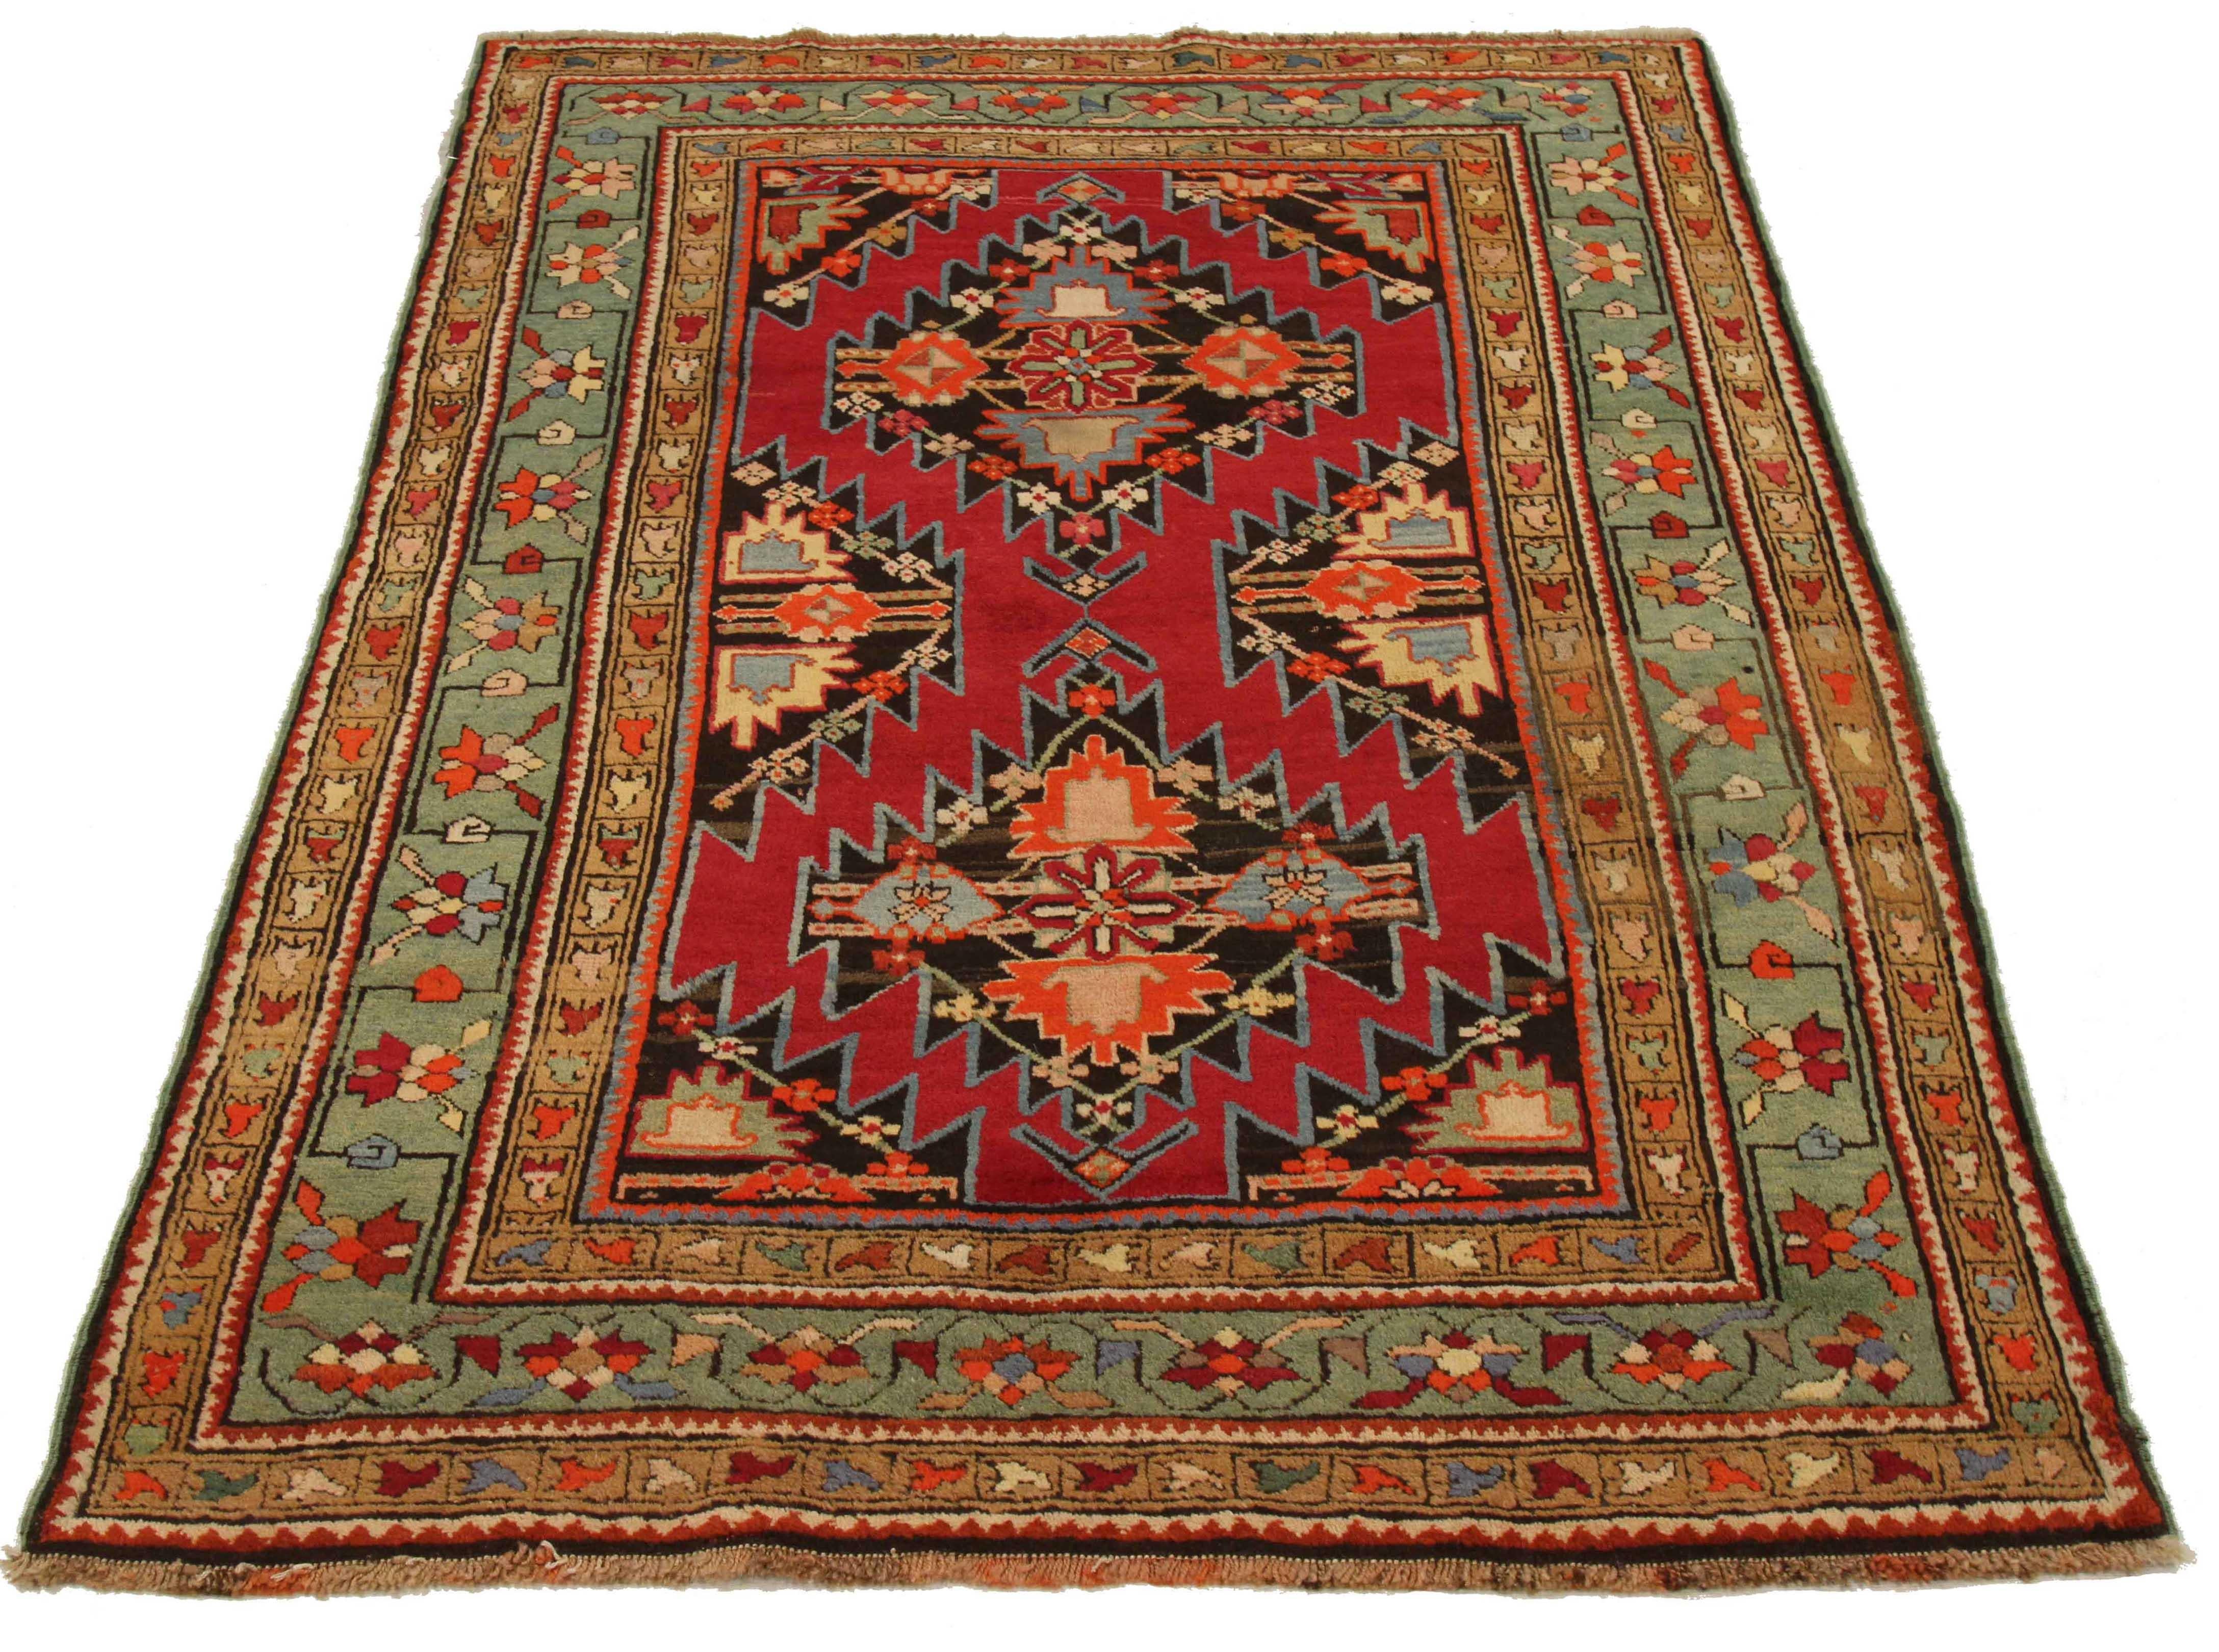 Antique Russian area rug handwoven from the finest sheep’s wool. It’s colored with all-natural vegetable dyes that are safe for humans and pets. It’s a traditional Gharebagh design handwoven by expert artisans. It’s a lovely area rug that can be